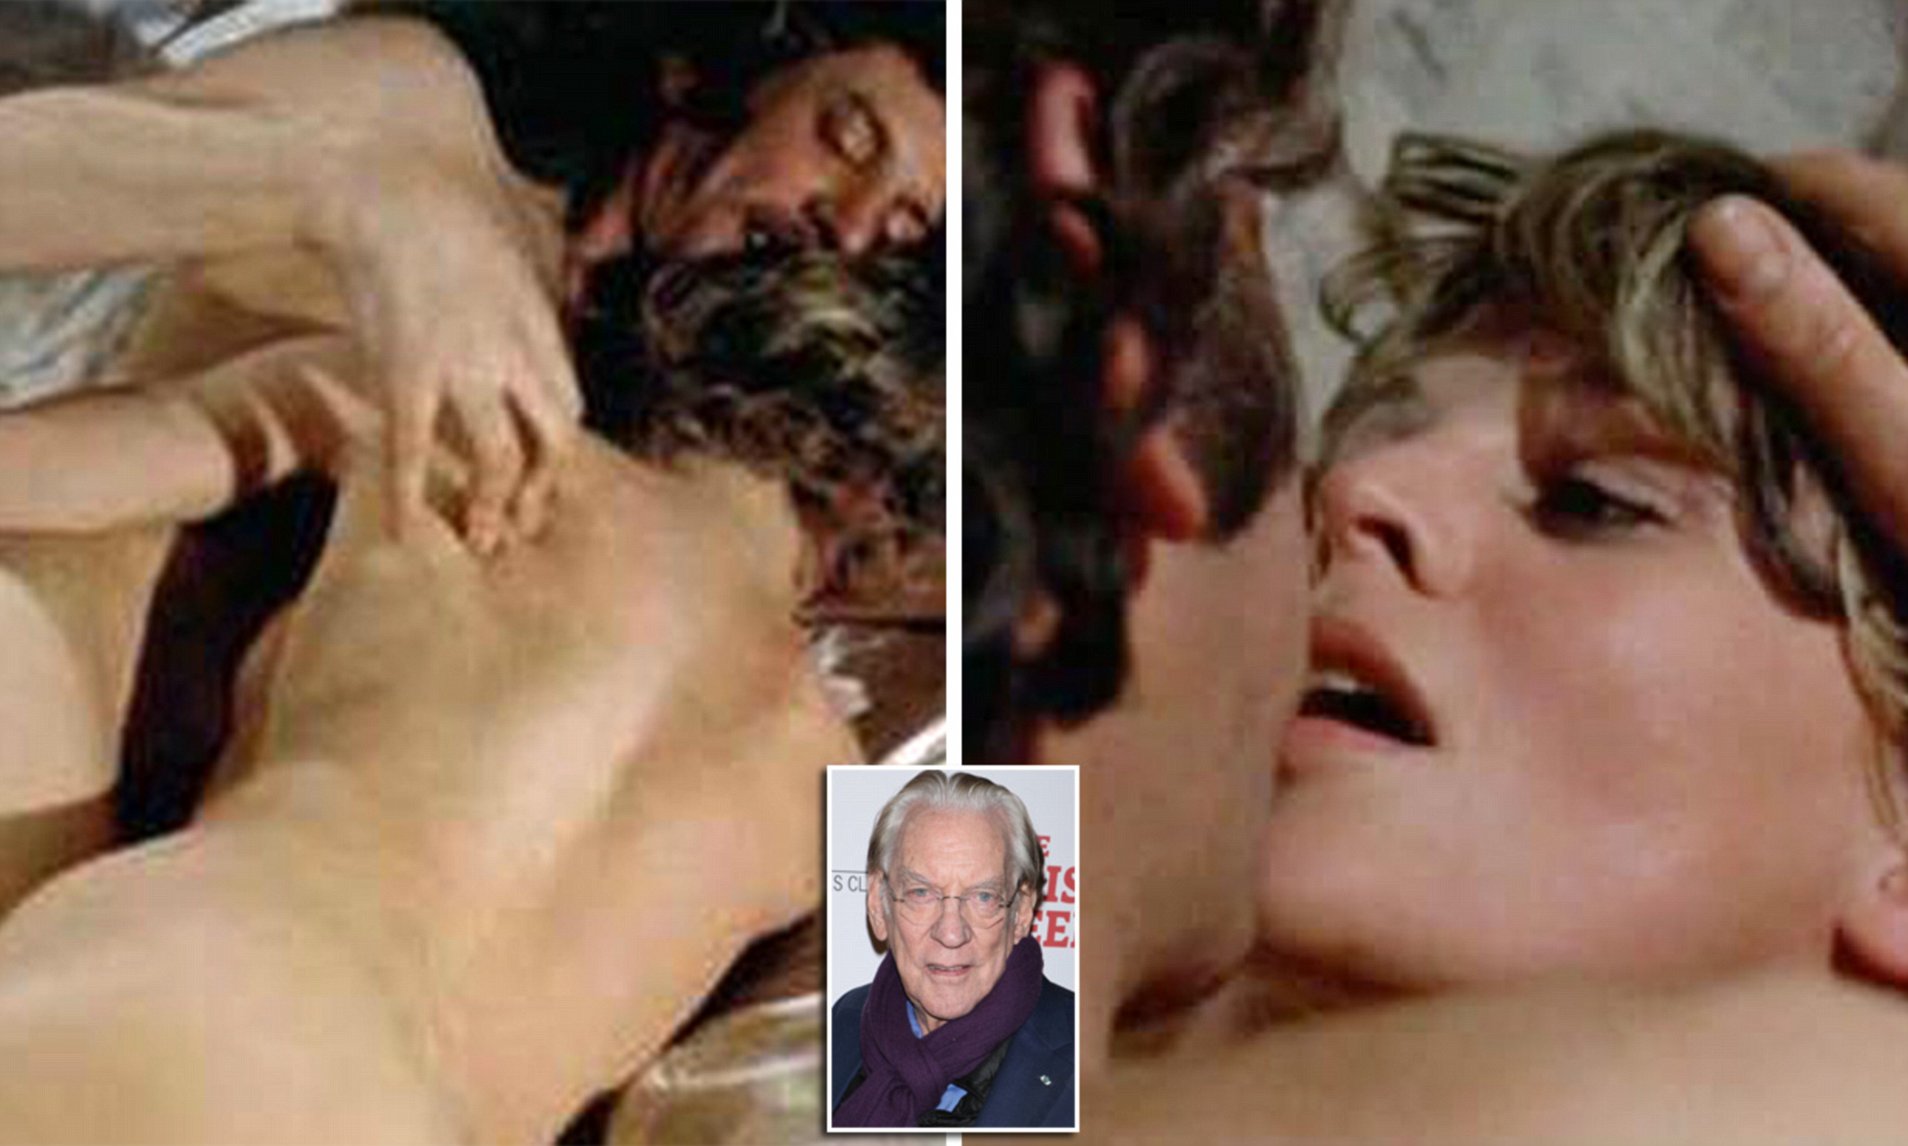 christie layne recommends donald sutherland sex scene pic